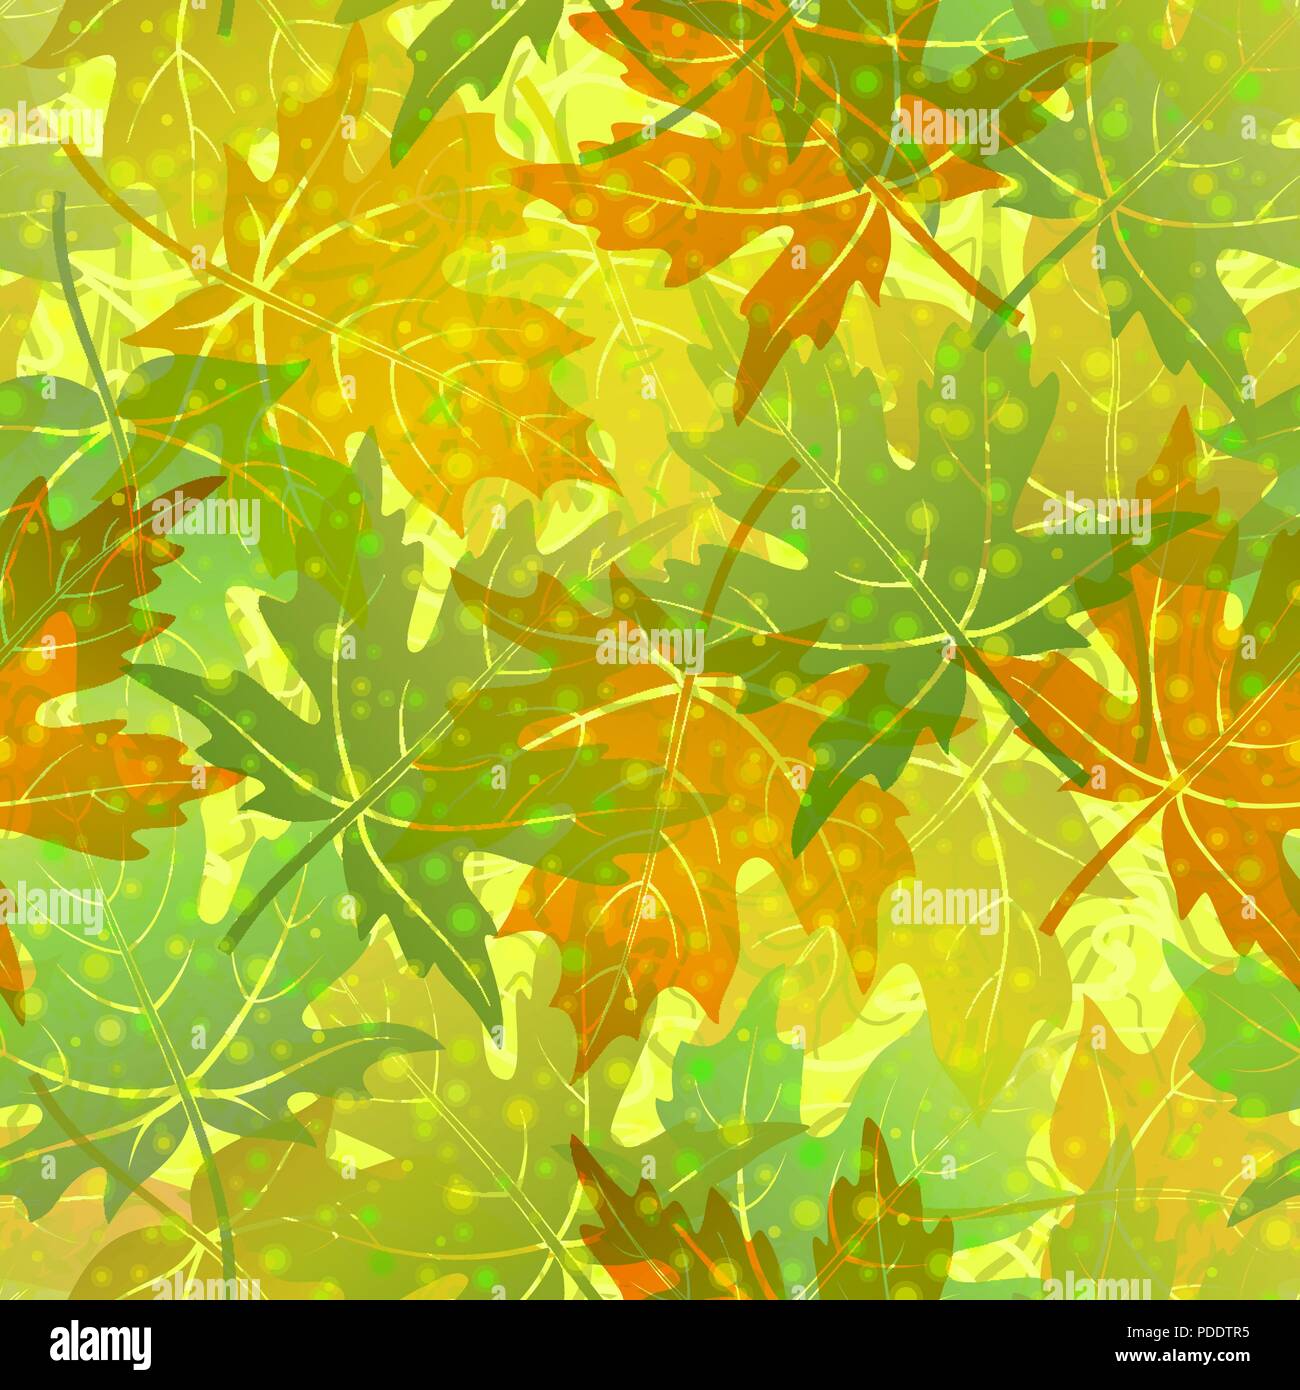 Seamless Background, Tile Pattern of Green Summer and Orange and Brown Autumn Maple Tree Leaves. Vector Stock Vector